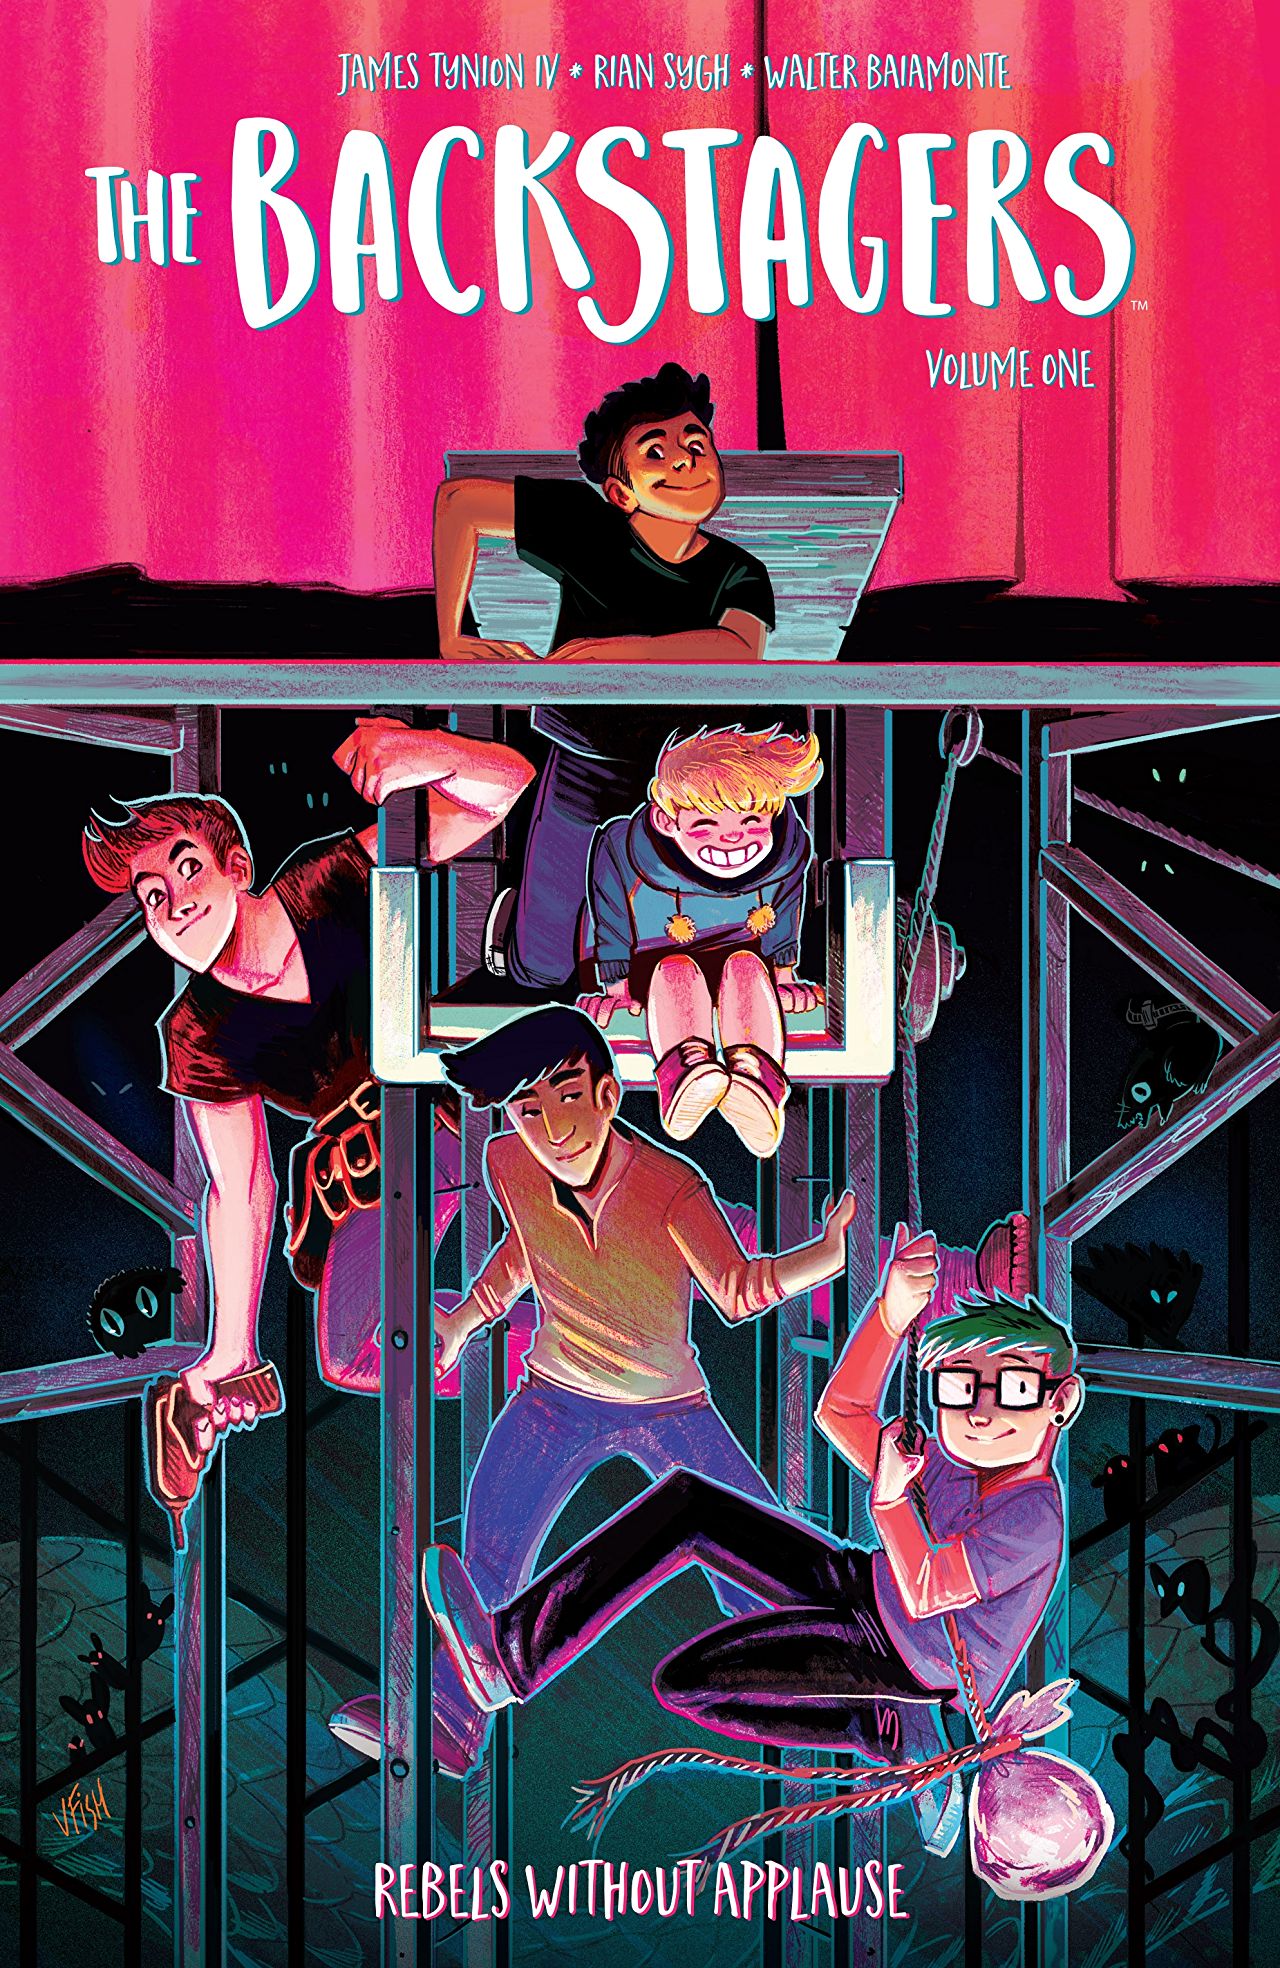 'The Backstagers Vol. 1: Rebels Without Applause' is an uplifting experience